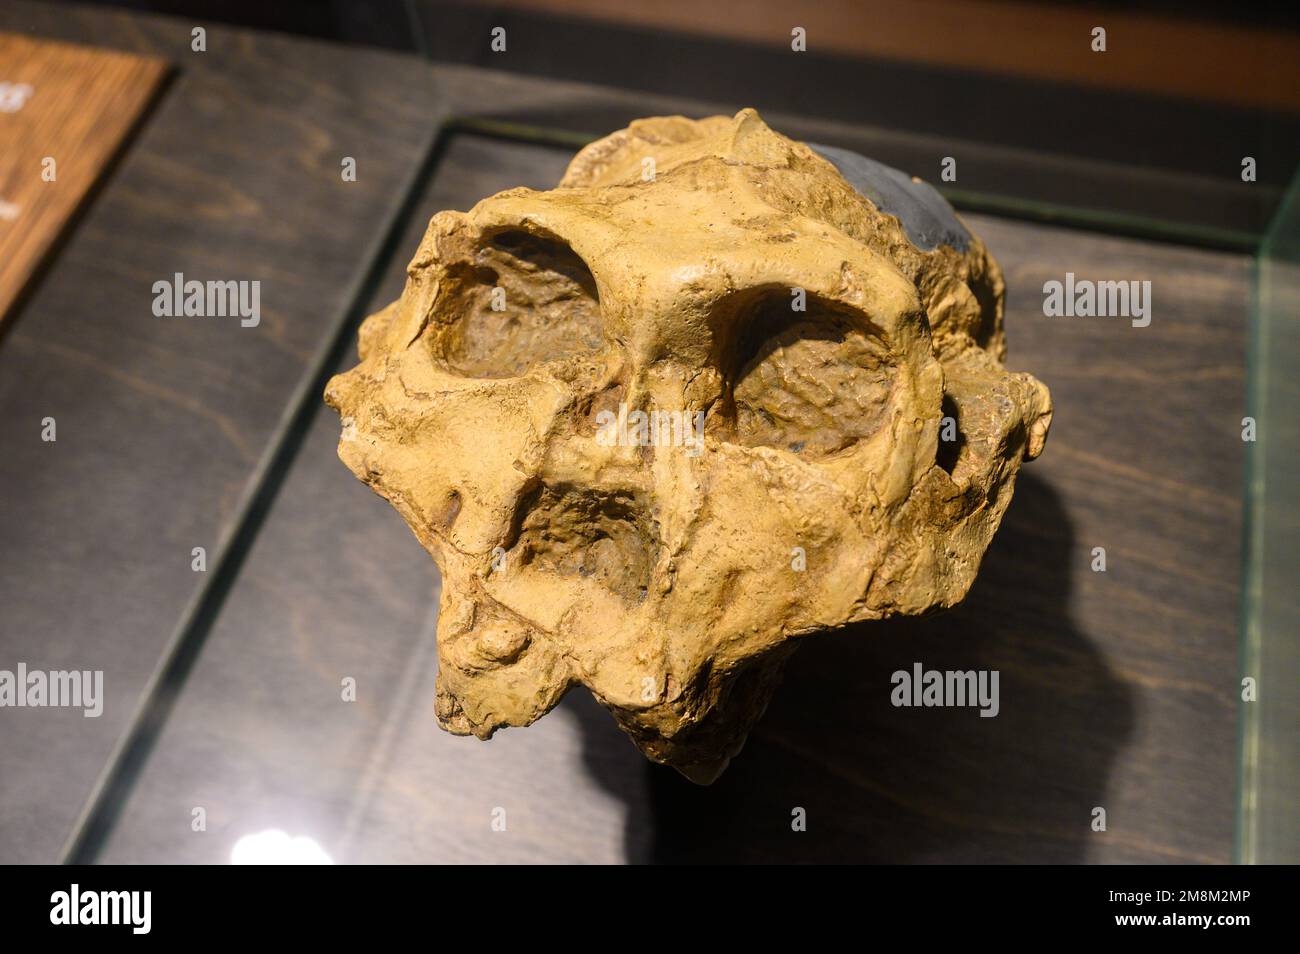 Paranthropus robustus. Skull (cast). Found in Swartkrans Cave, South Africa. On display in the Natural Sciences Museum in Brussels, Belgium. Stock Photo